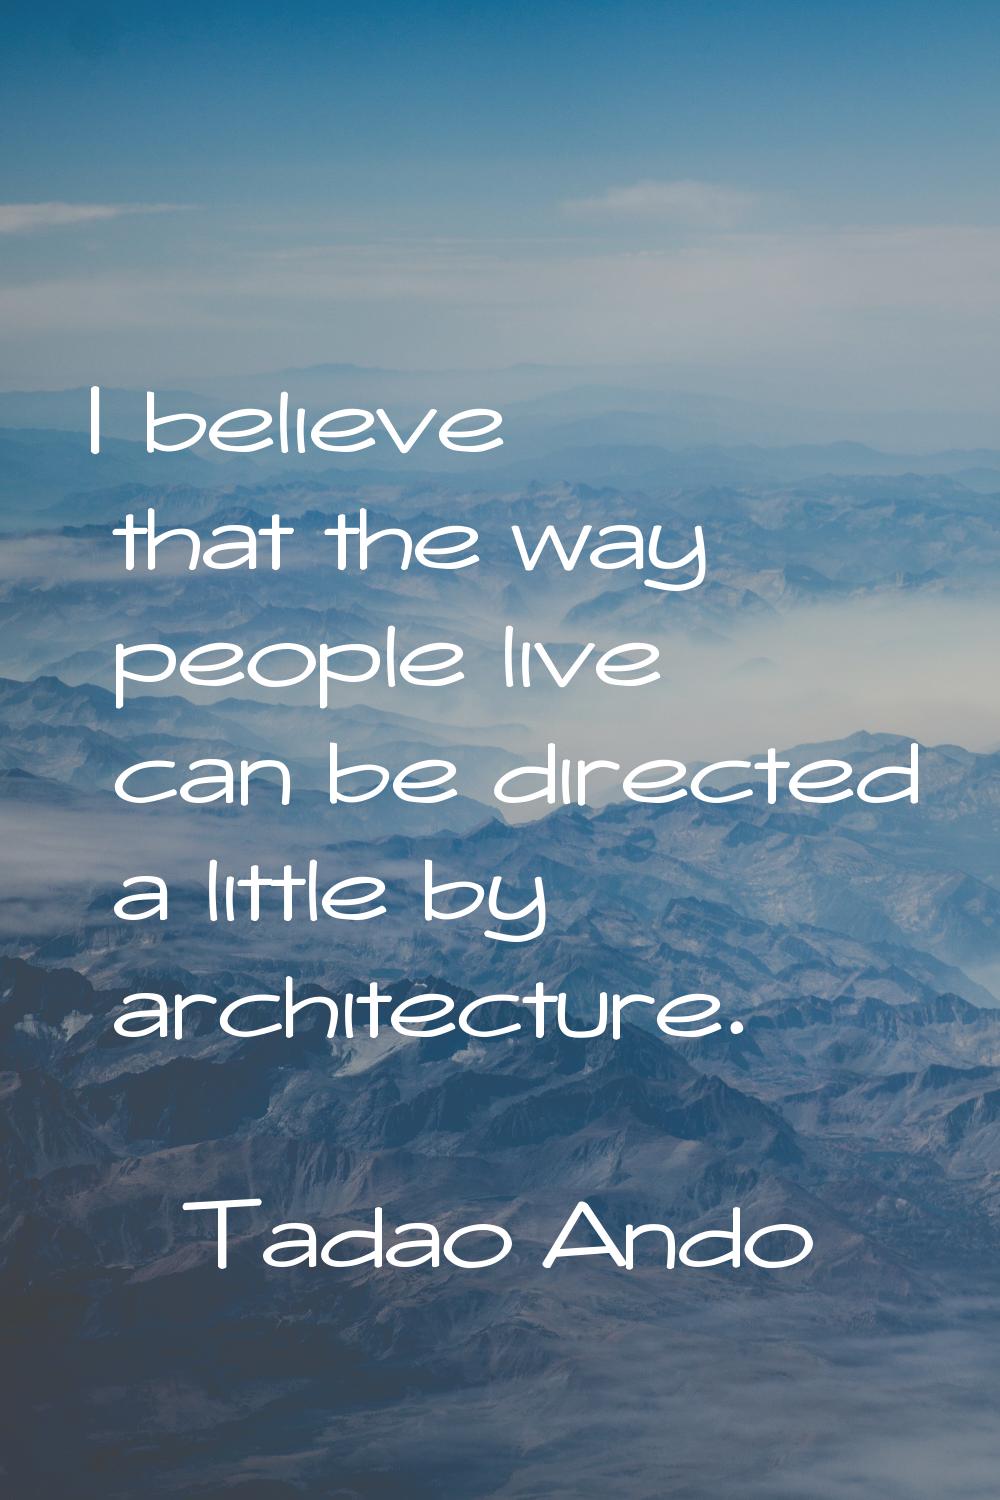 I believe that the way people live can be directed a little by architecture.